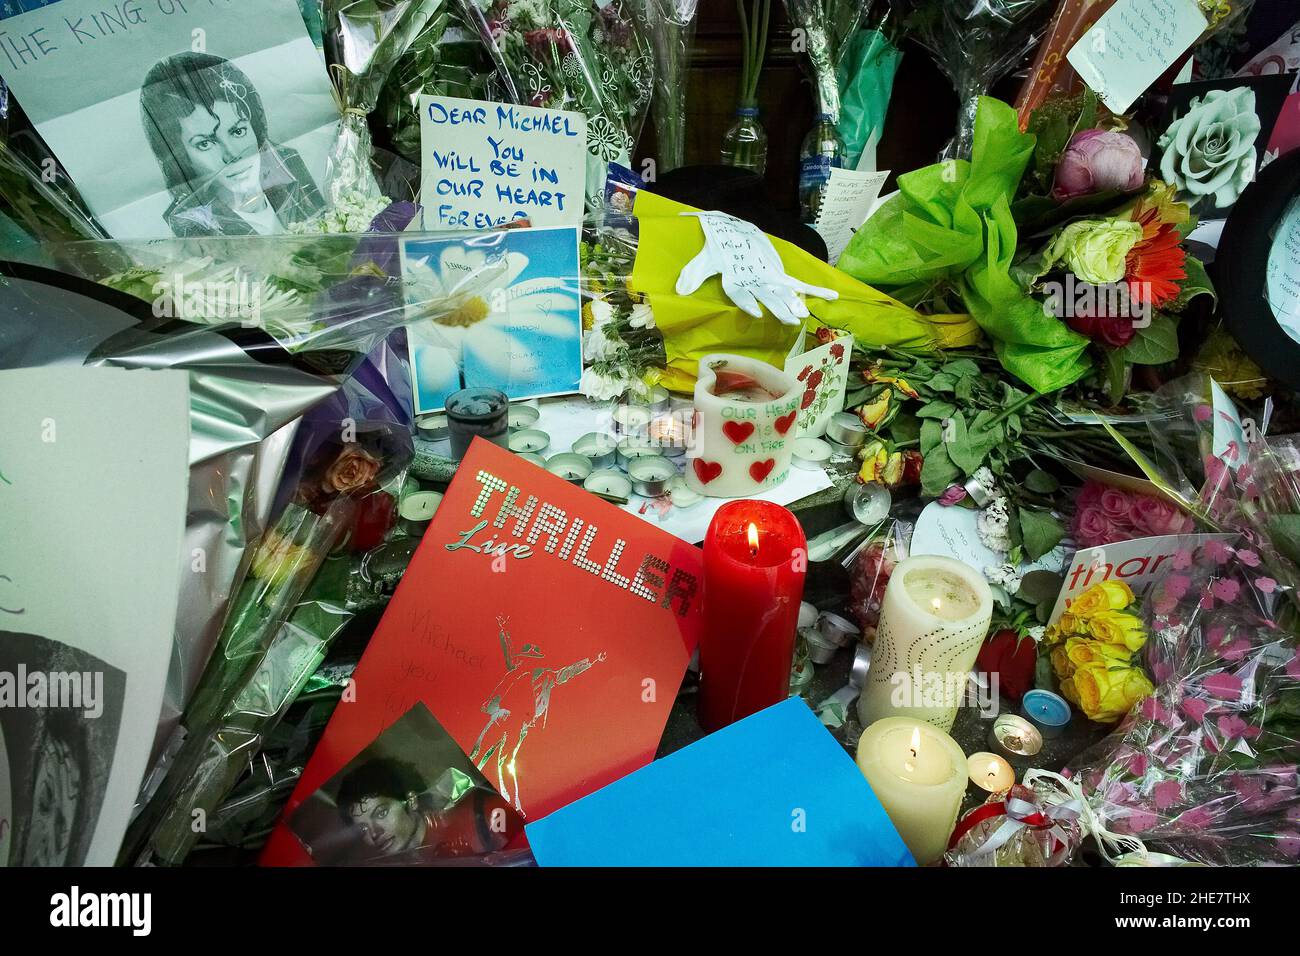 Flowers and tribute messages from Michael Jackson fans outside the Lyric Theatre in London. Stock Photo